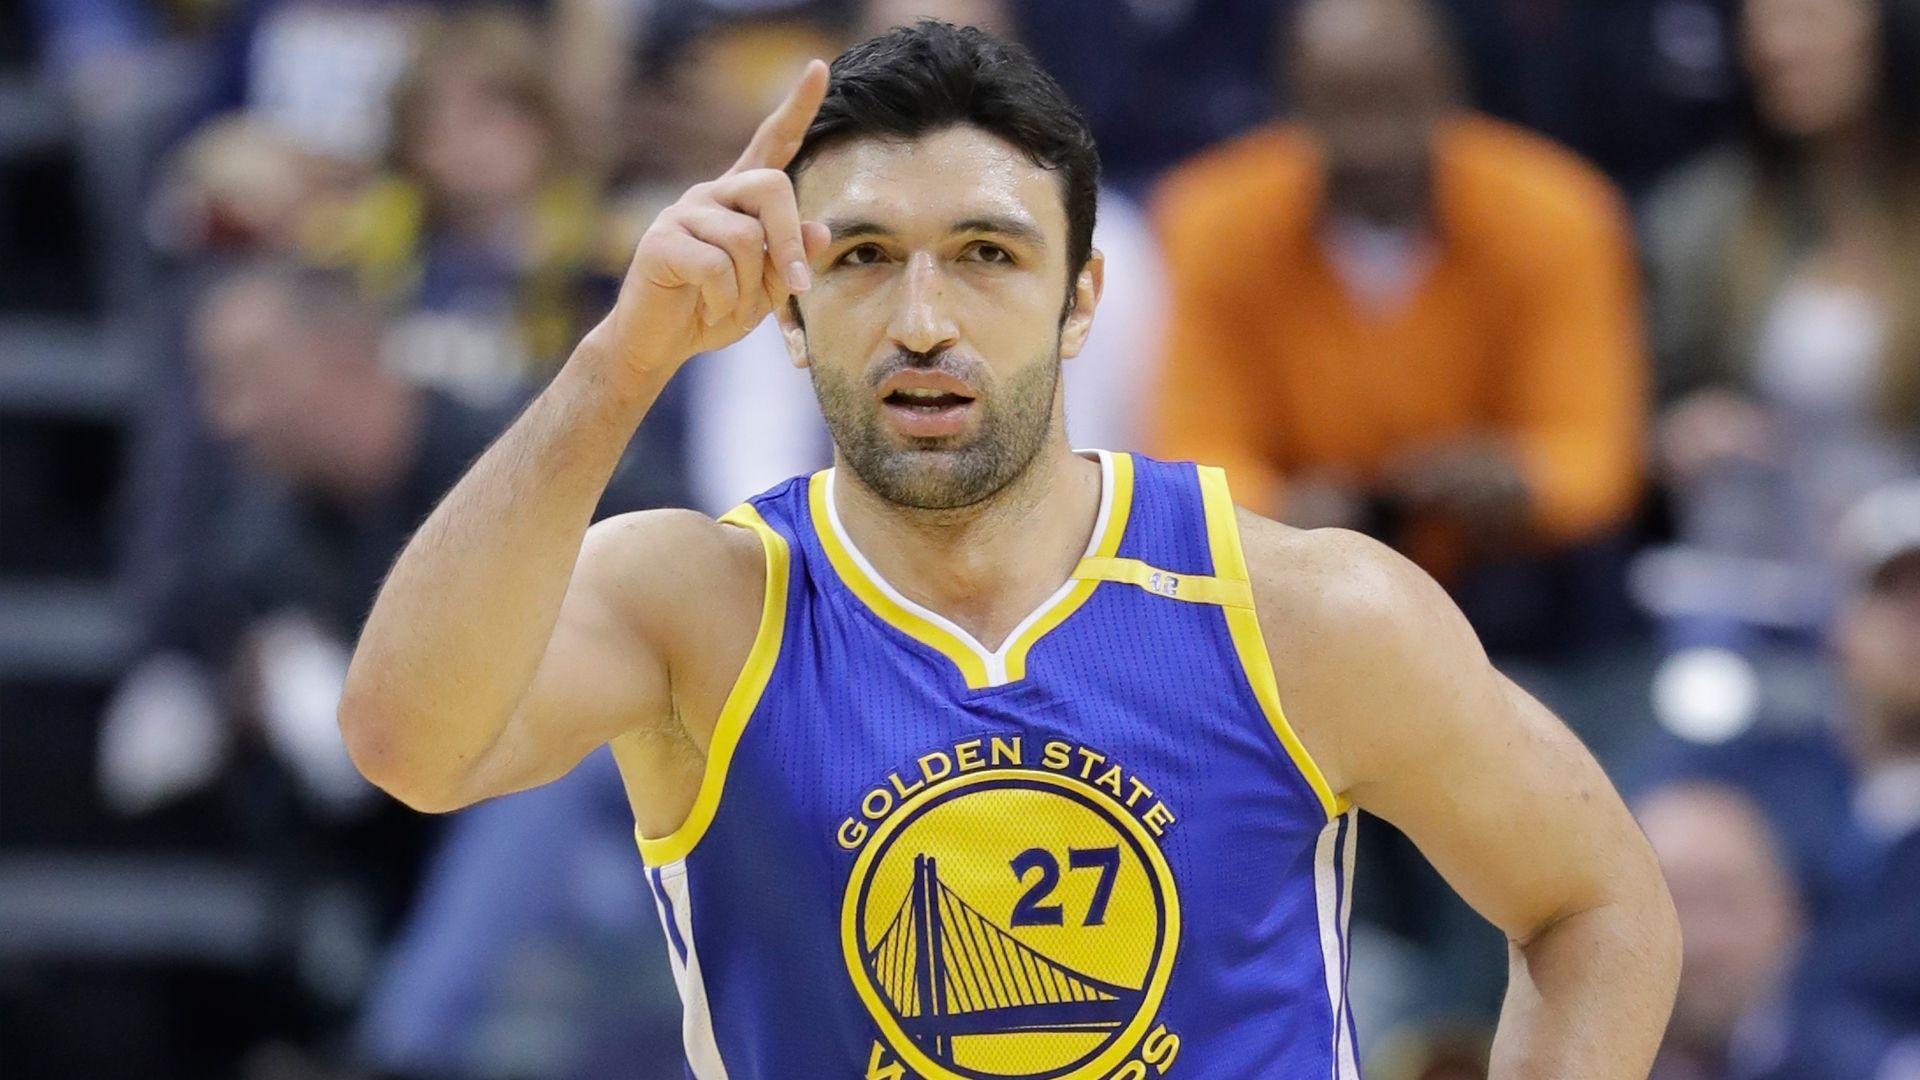 Pachulia's young son shows off '#stephrange'. NBCS Bay Area